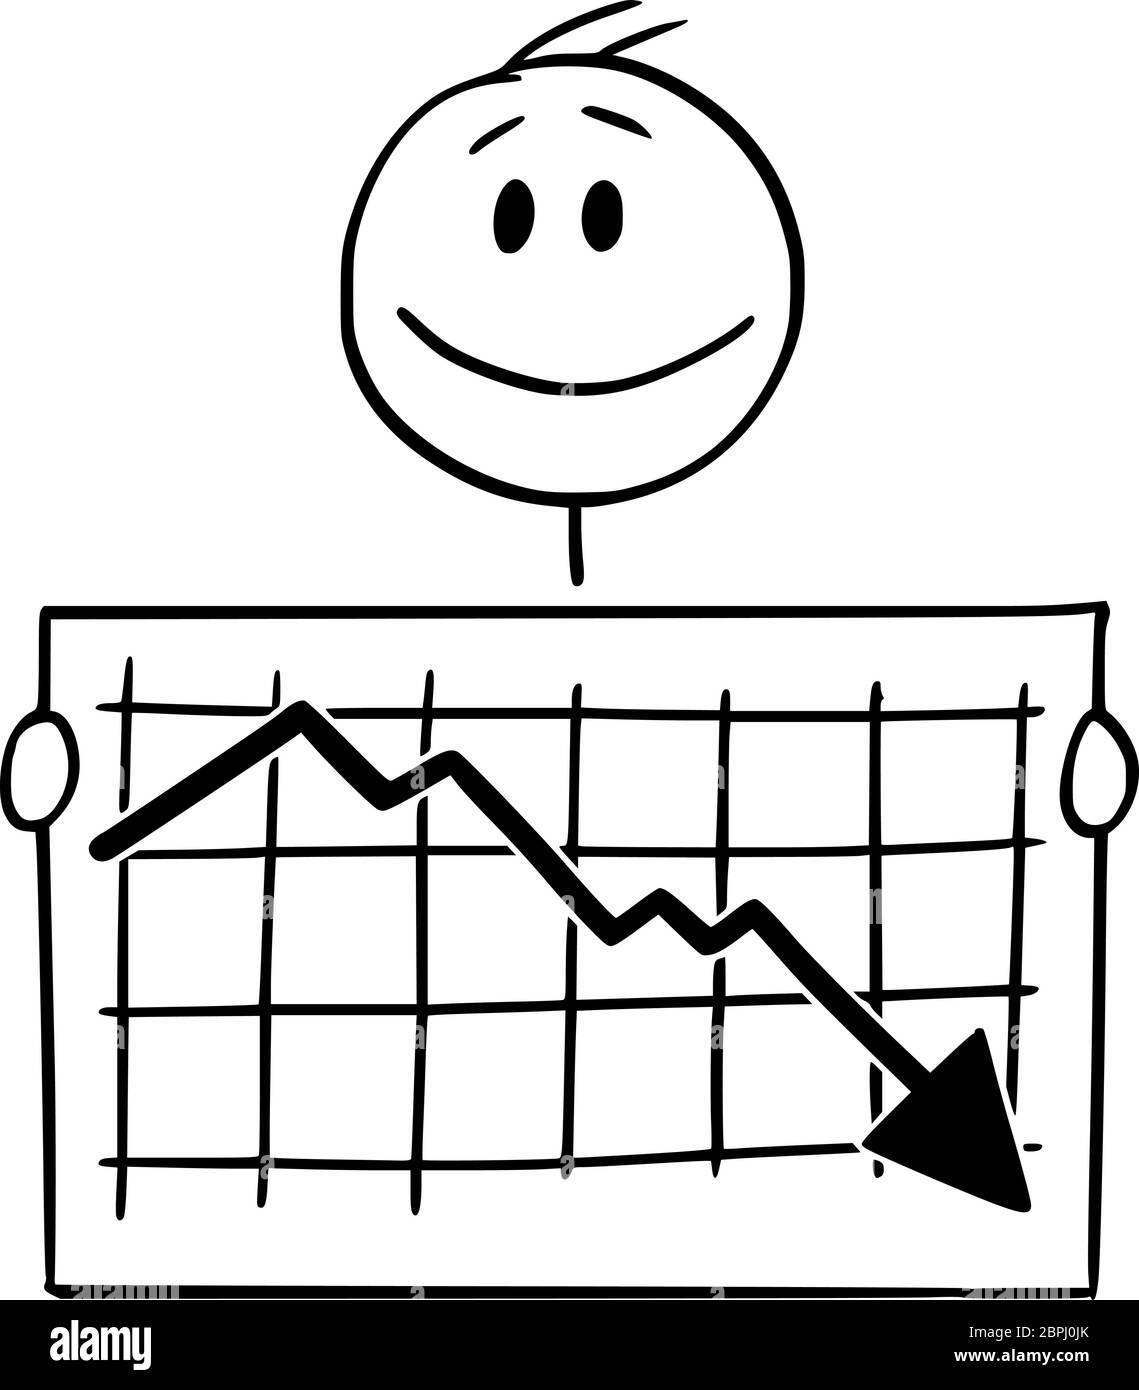 Vector cartoon stick figure drawing conceptual illustration of happy smiling man or businessman holding falling financial chart or graph. Stock Vector